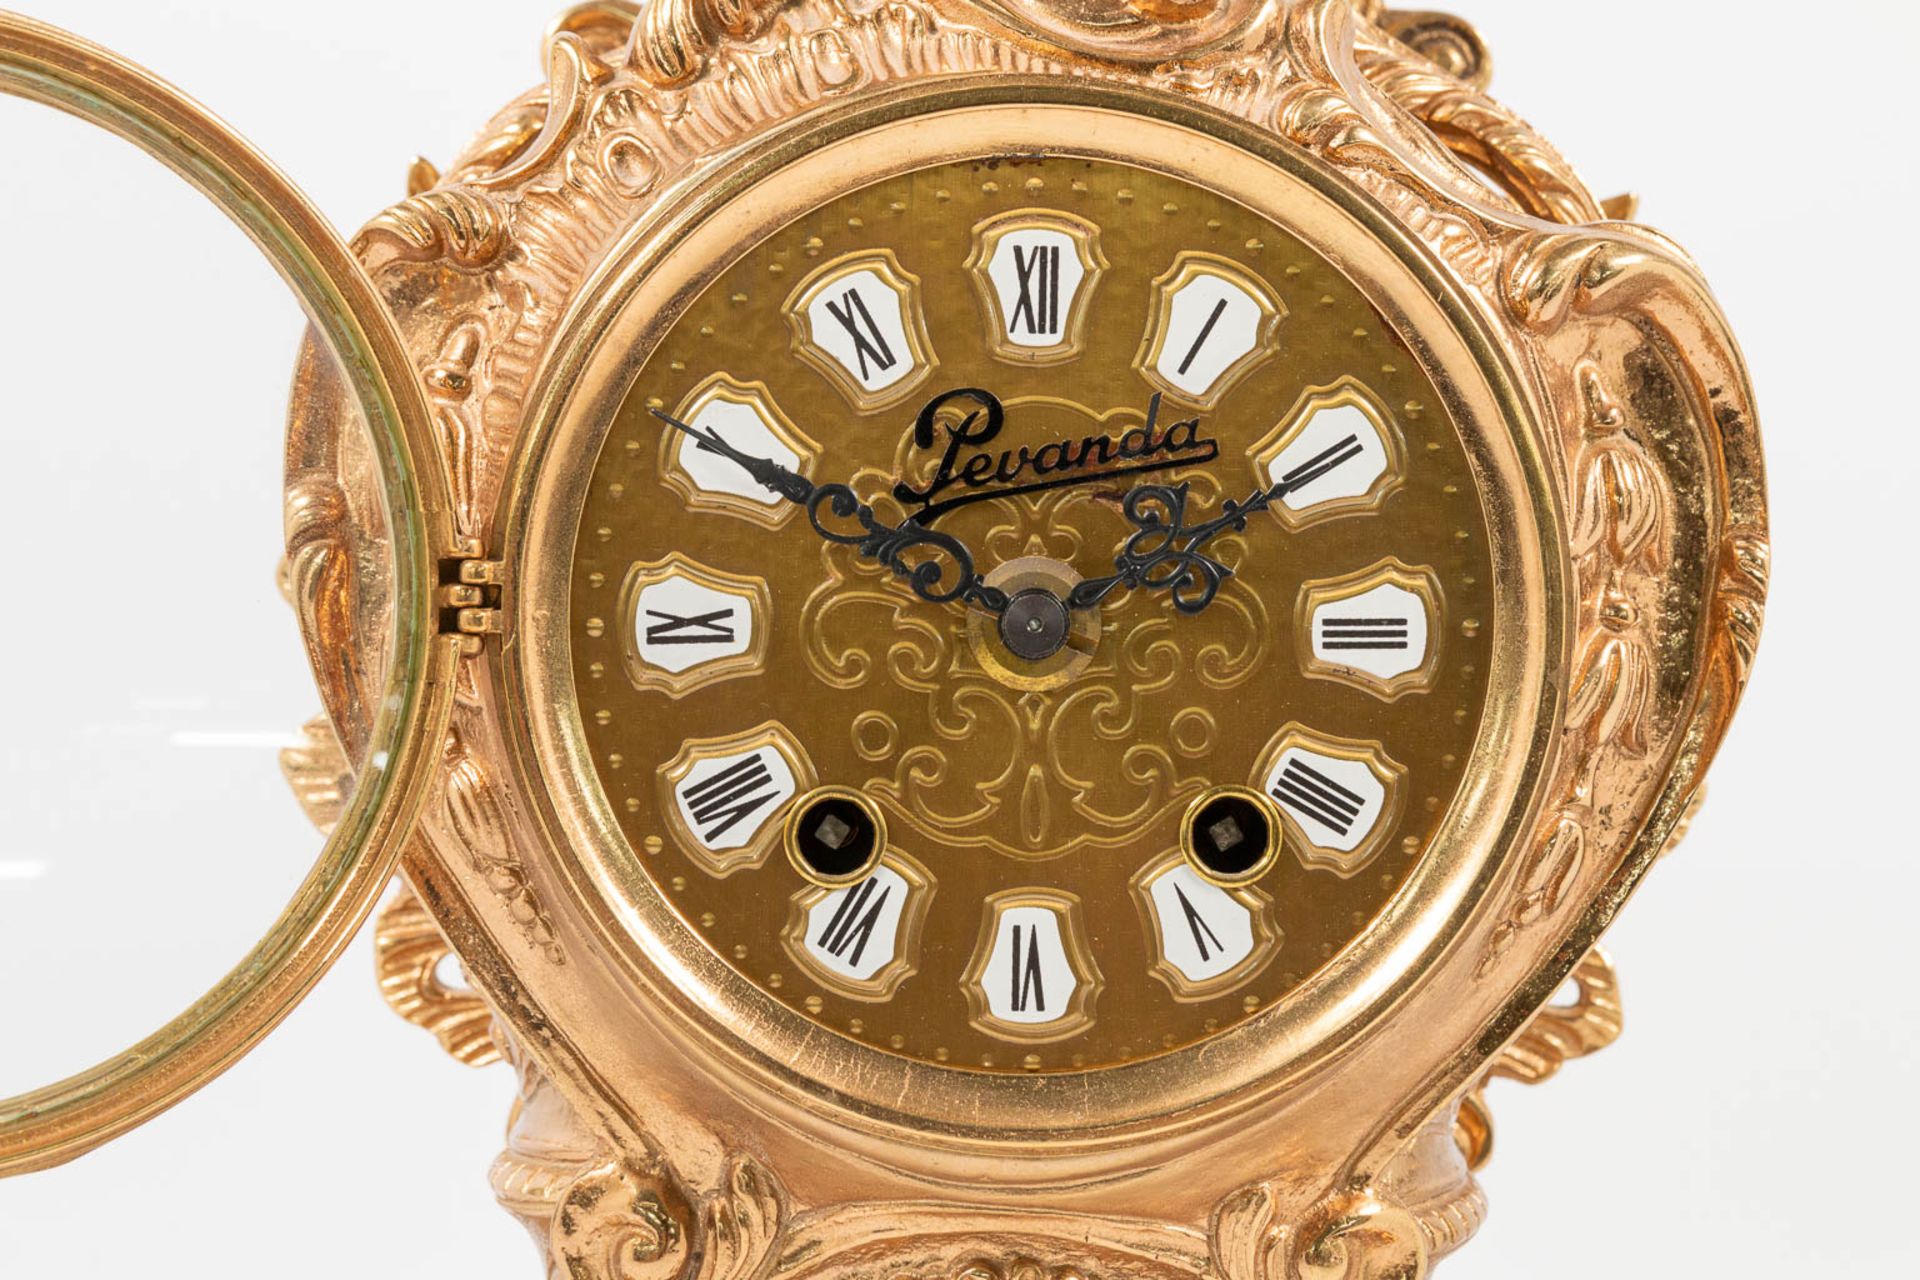 A vintage bronze clock 'Pevanda' with mechanical movement, made around 1970. - Image 18 of 19